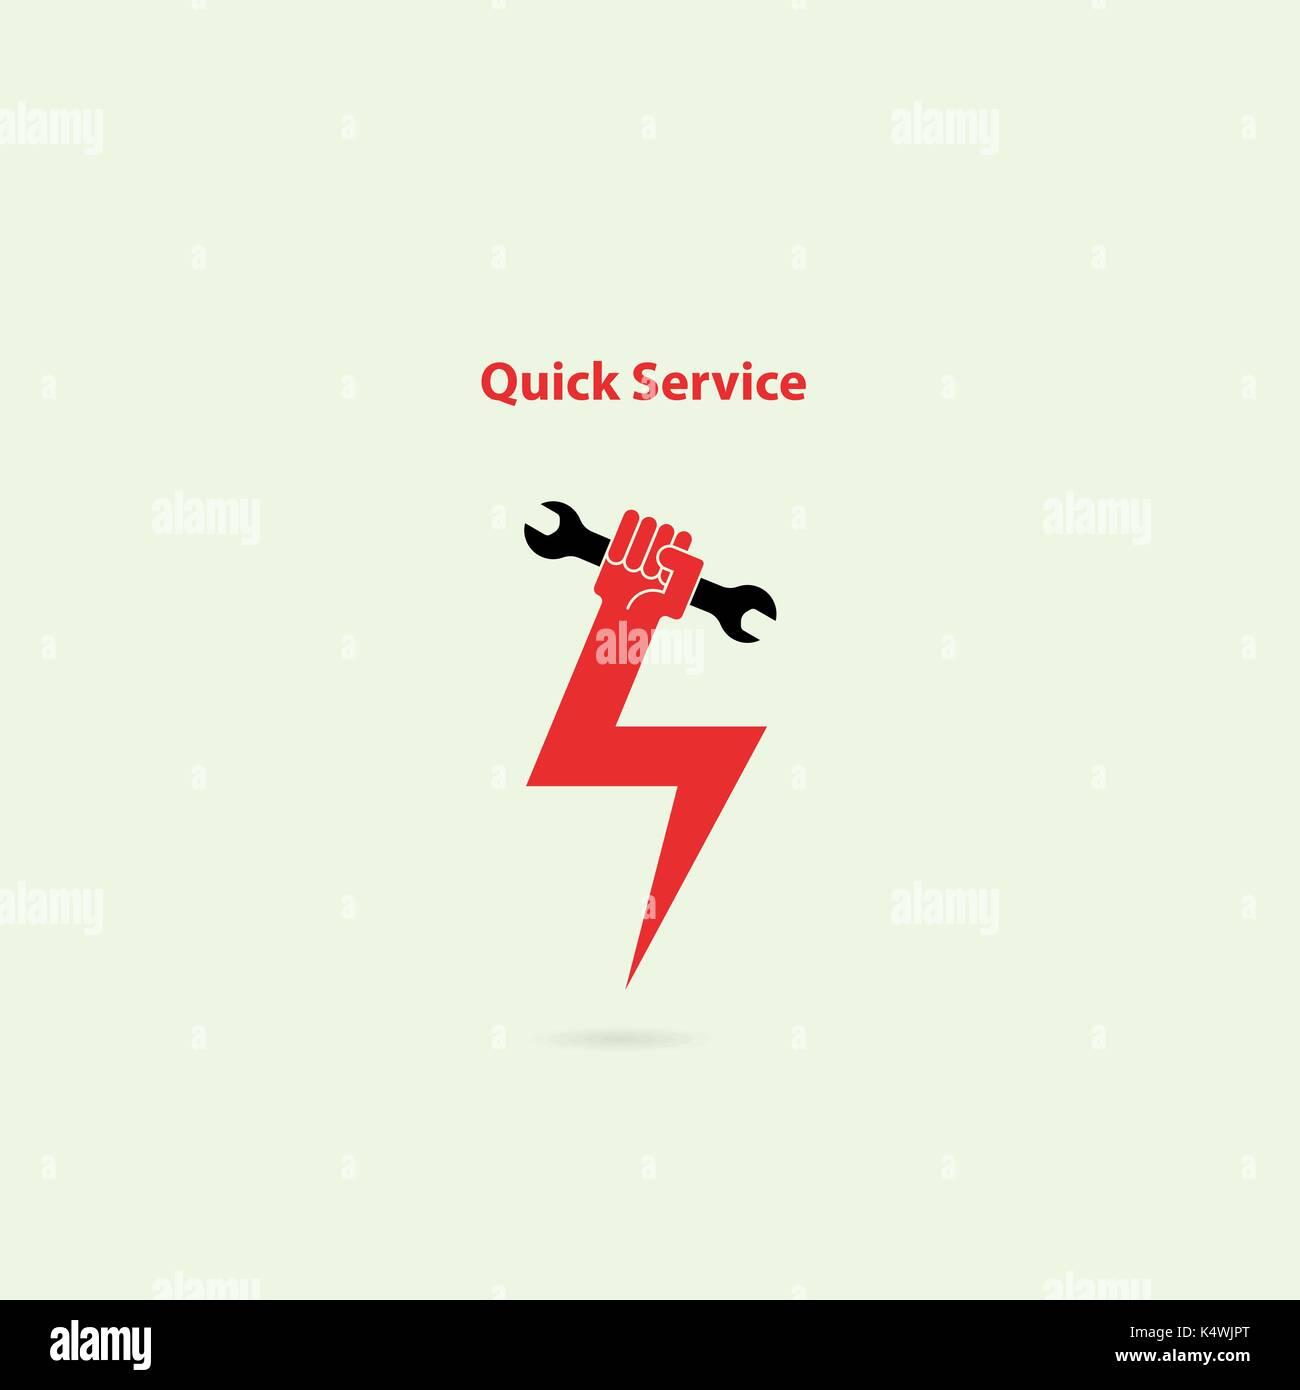 Human hand flash icon and wrench vector logo design template.Service tool icon.Quick fast flash repair sign.Quick Repairing concept.Maintenance and te Stock Vector